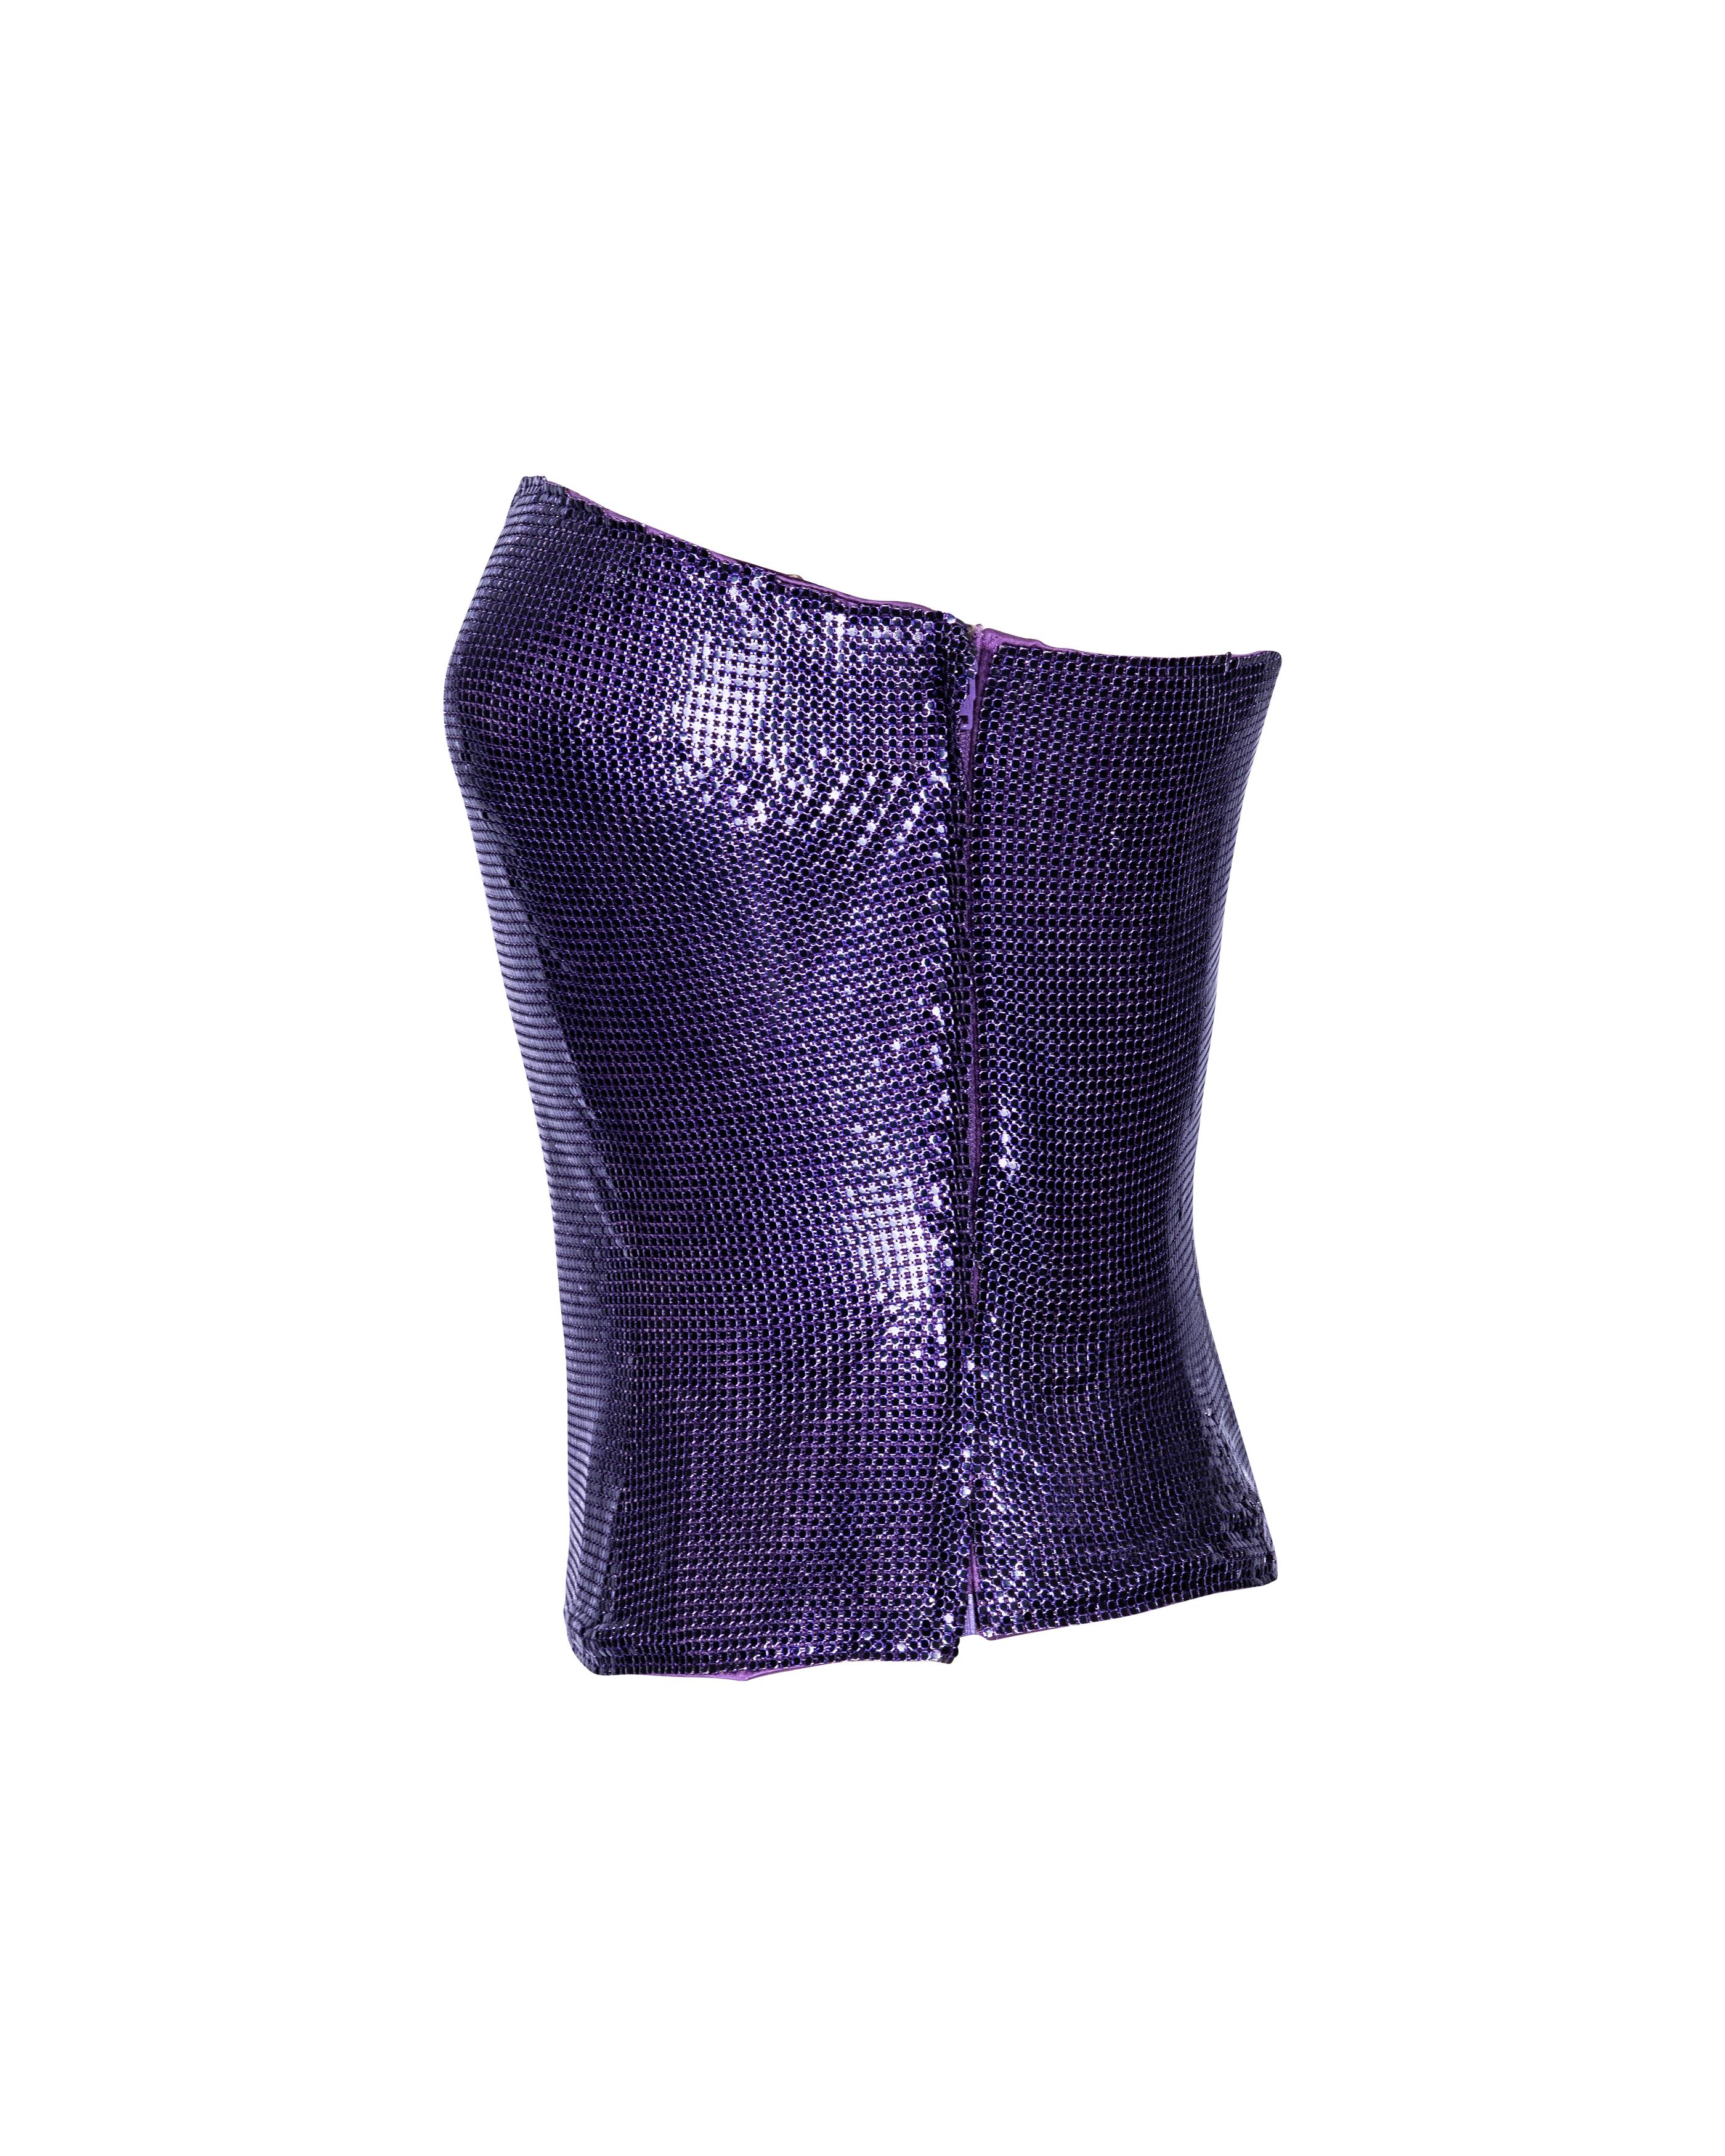 Women's S/S 1998 Atelier Versace Haute Couture Purple Strapless Oroton Chainmail Top For Sale